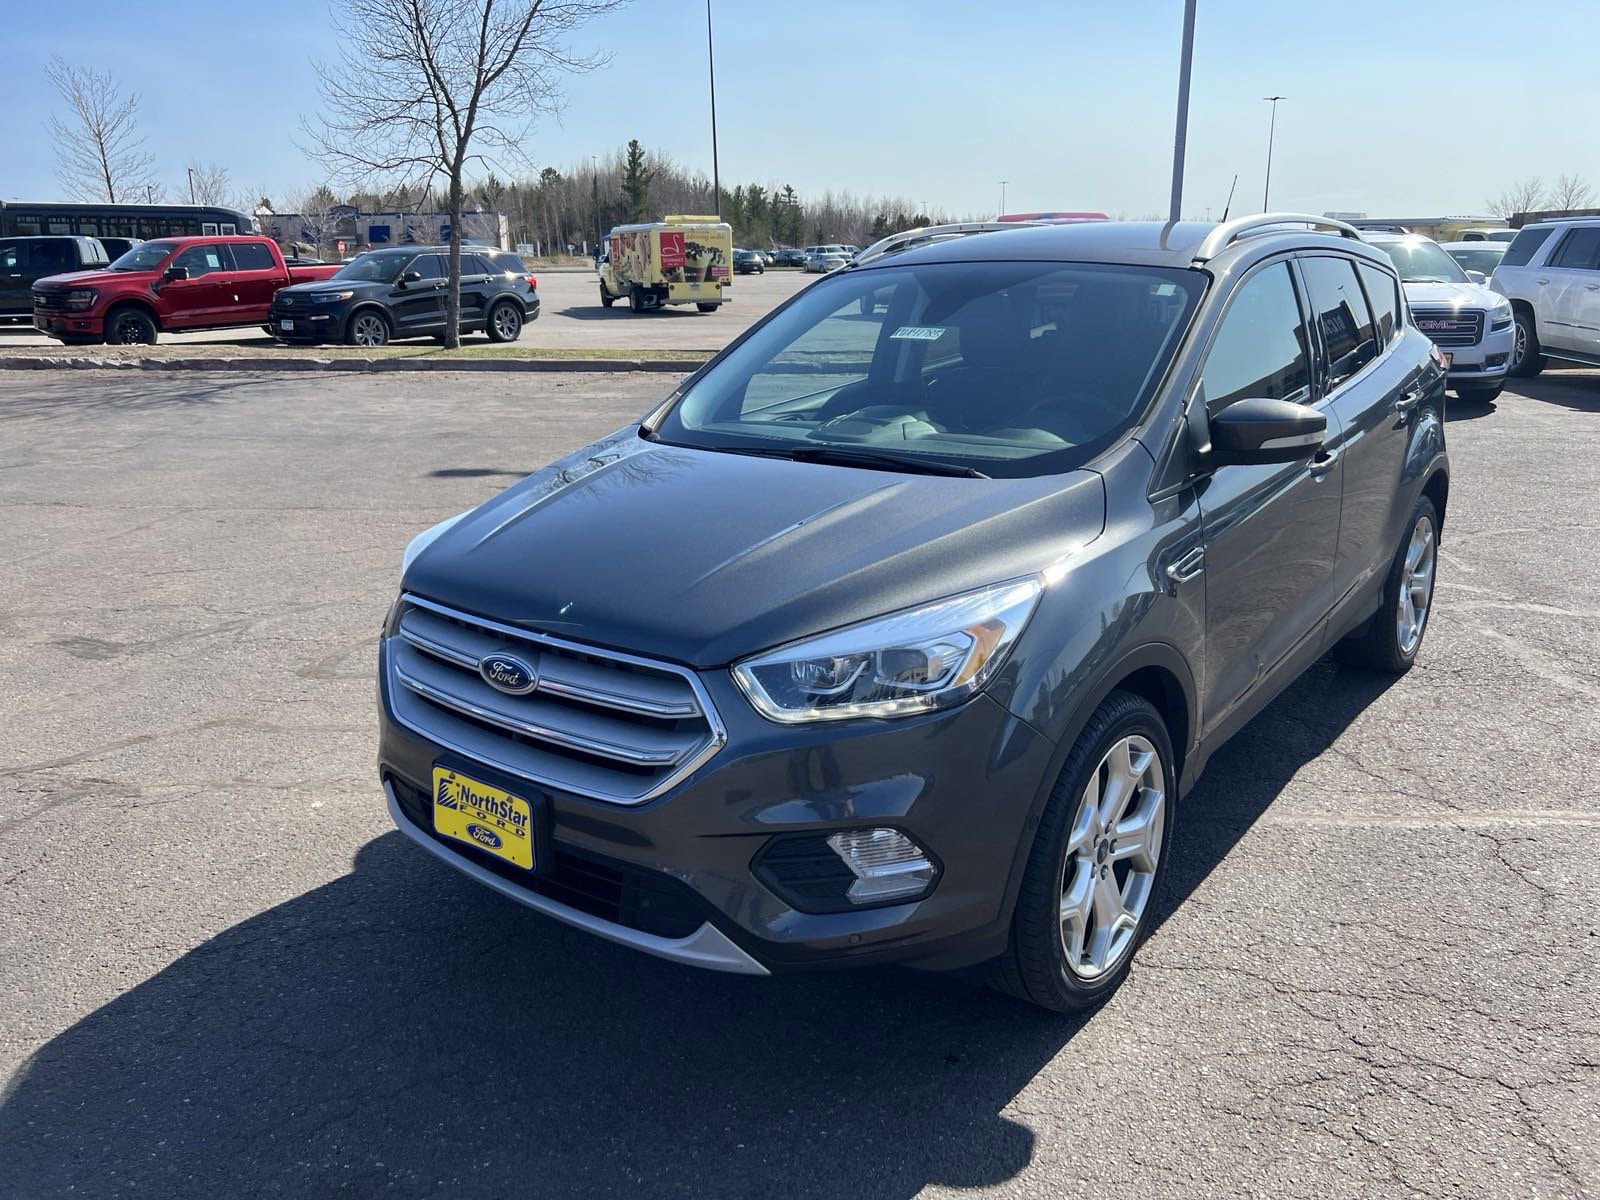 Used 2019 Ford Escape Titanium with VIN 1FMCU9J99KUA41785 for sale in Duluth, Minnesota